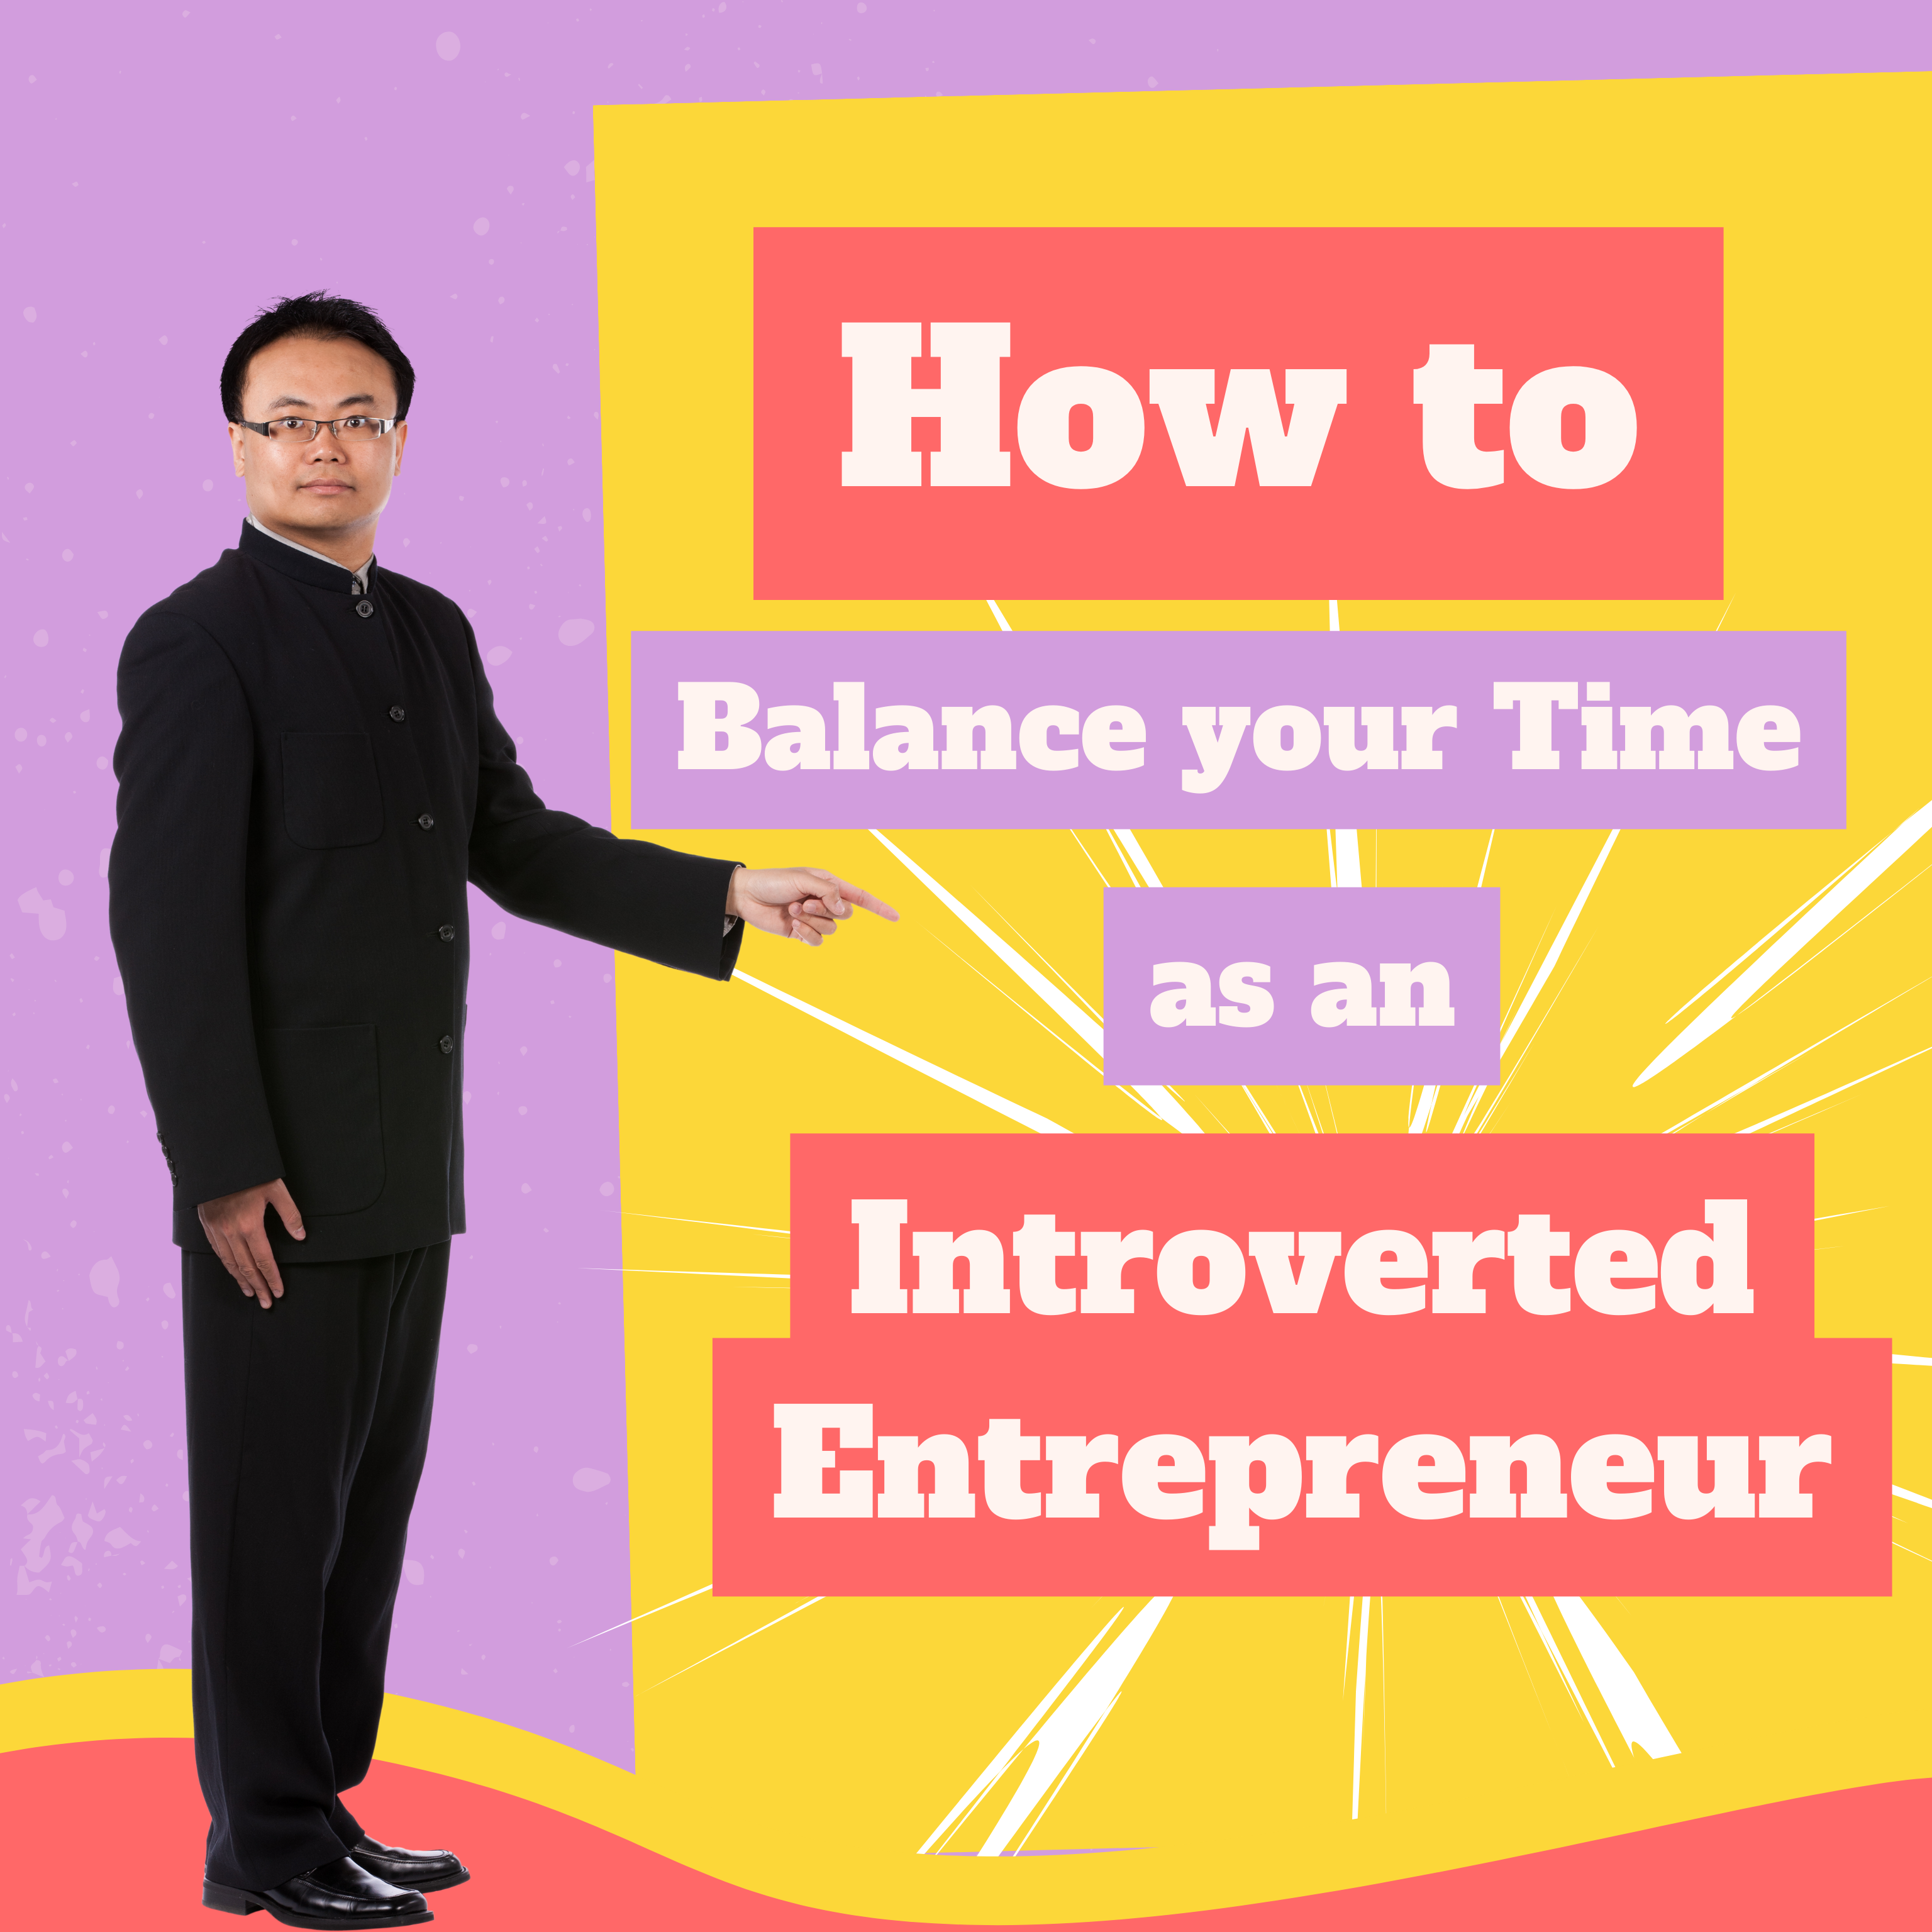 How to Balance Your Time as an Introverted Entrepreneur